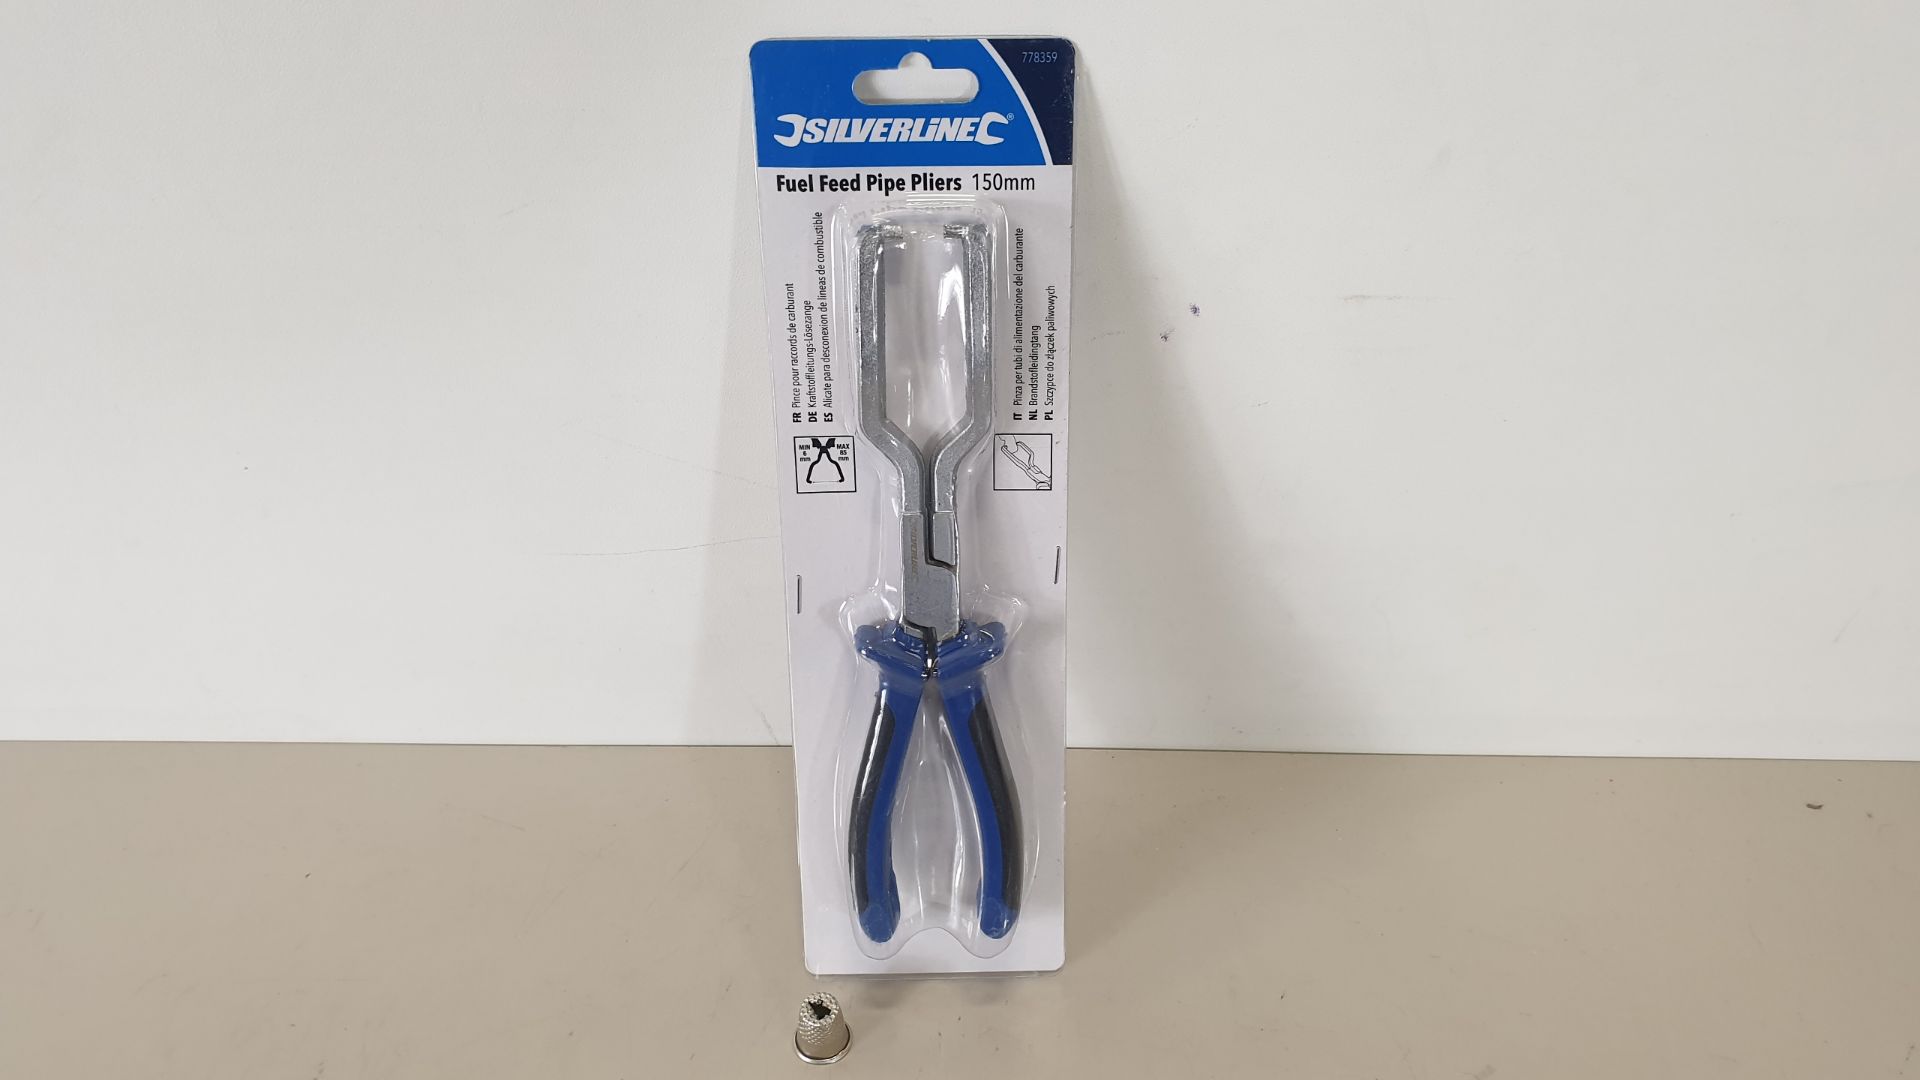 48 X BRAND NEW SILVERLINE FUEL FEED PIPE PLIERS 150MM (PROD CODE 778359) TRADE PRICE £10.55 (EXC